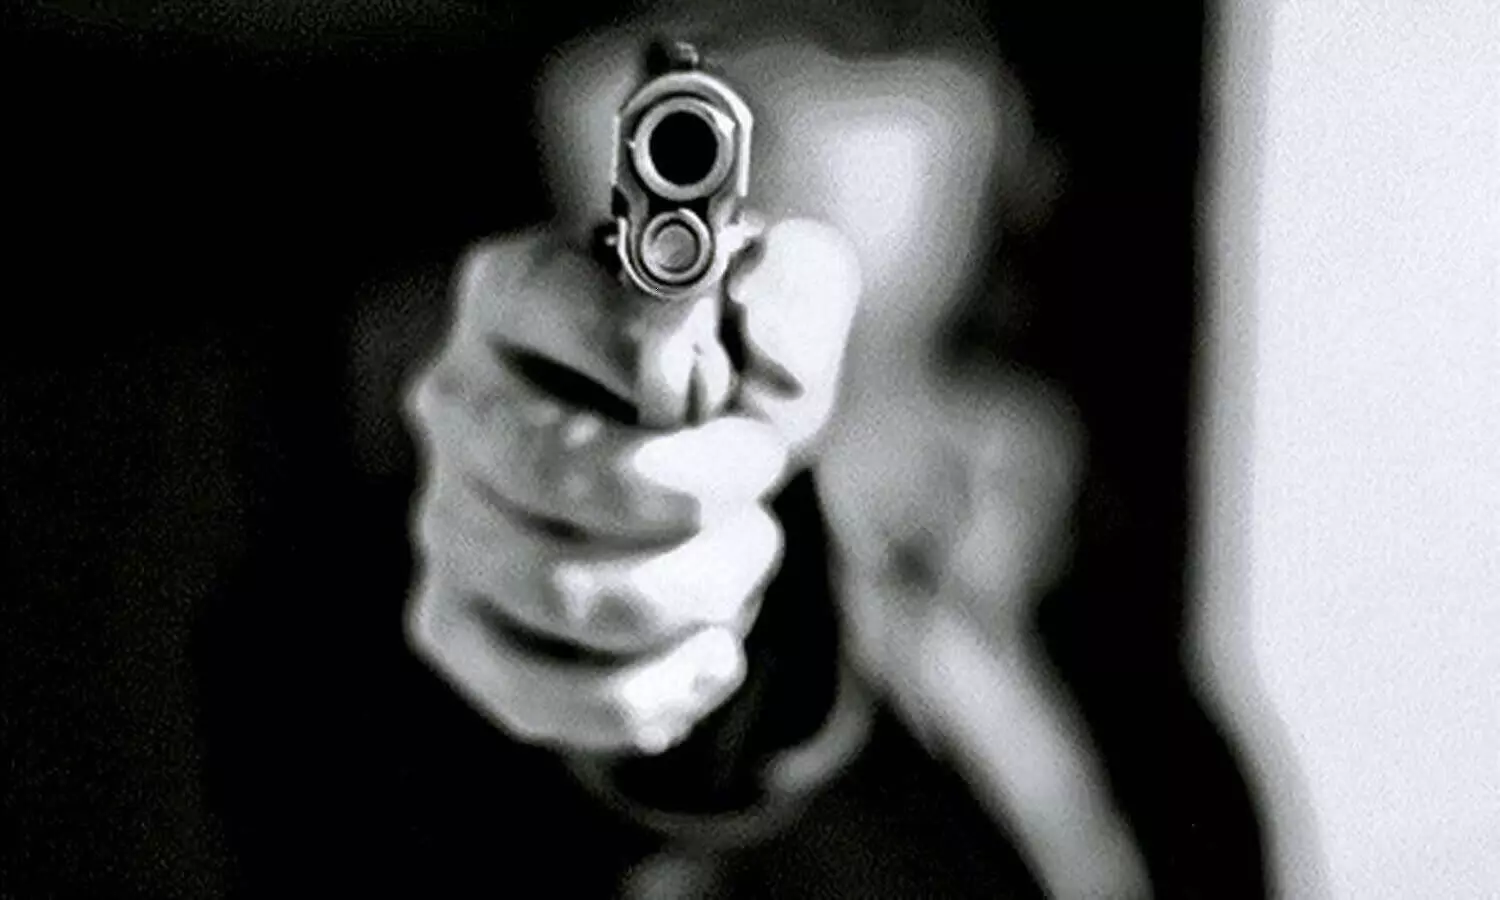 youth shot parents in family dispute seven rounds fired from licensed weapon in prayagraj